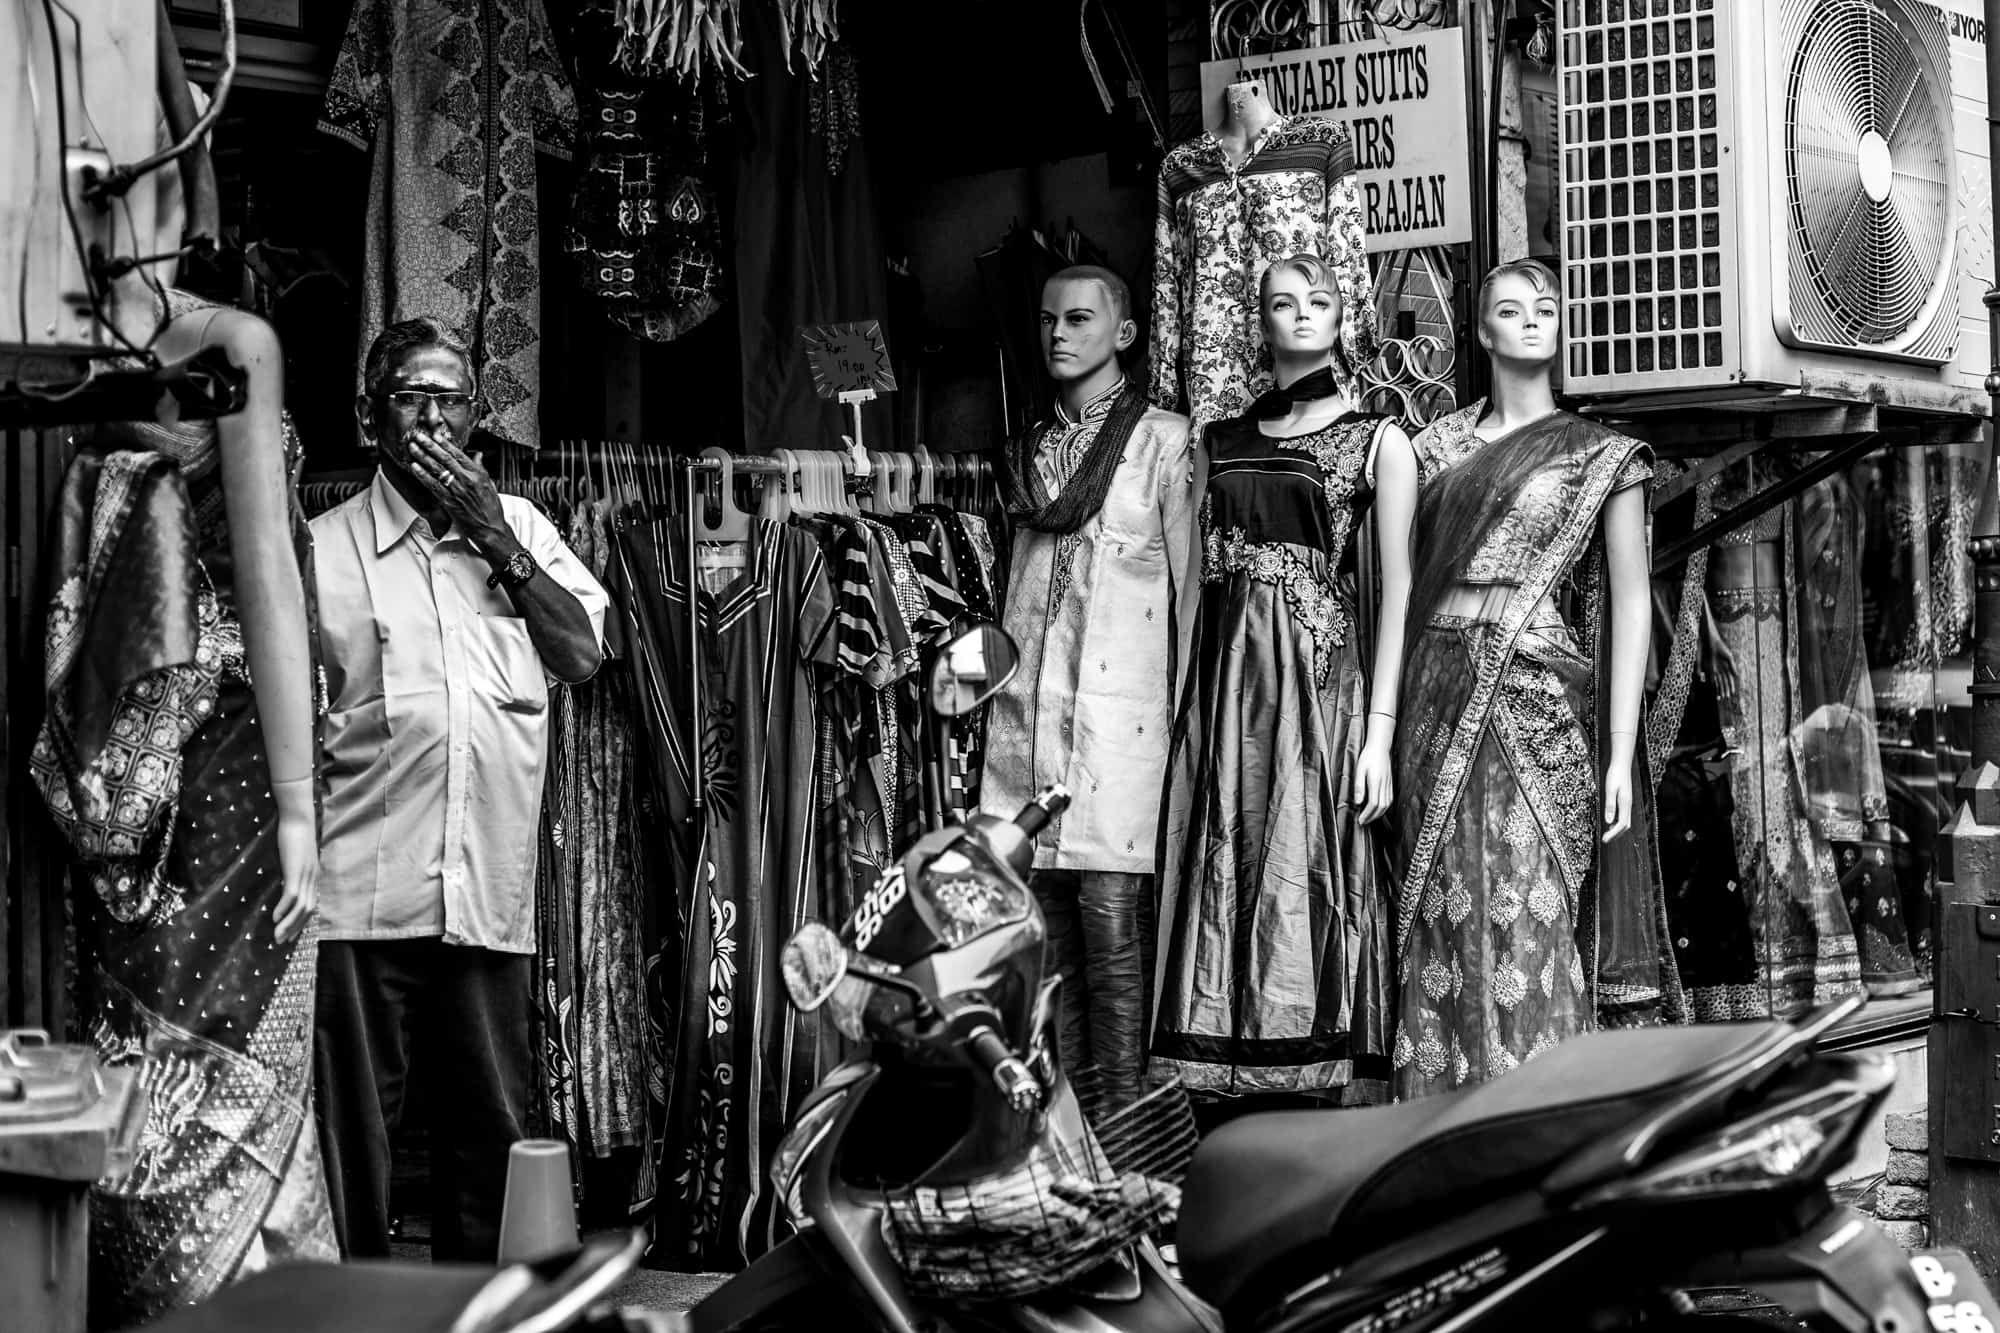 Little India, George Town, Penang